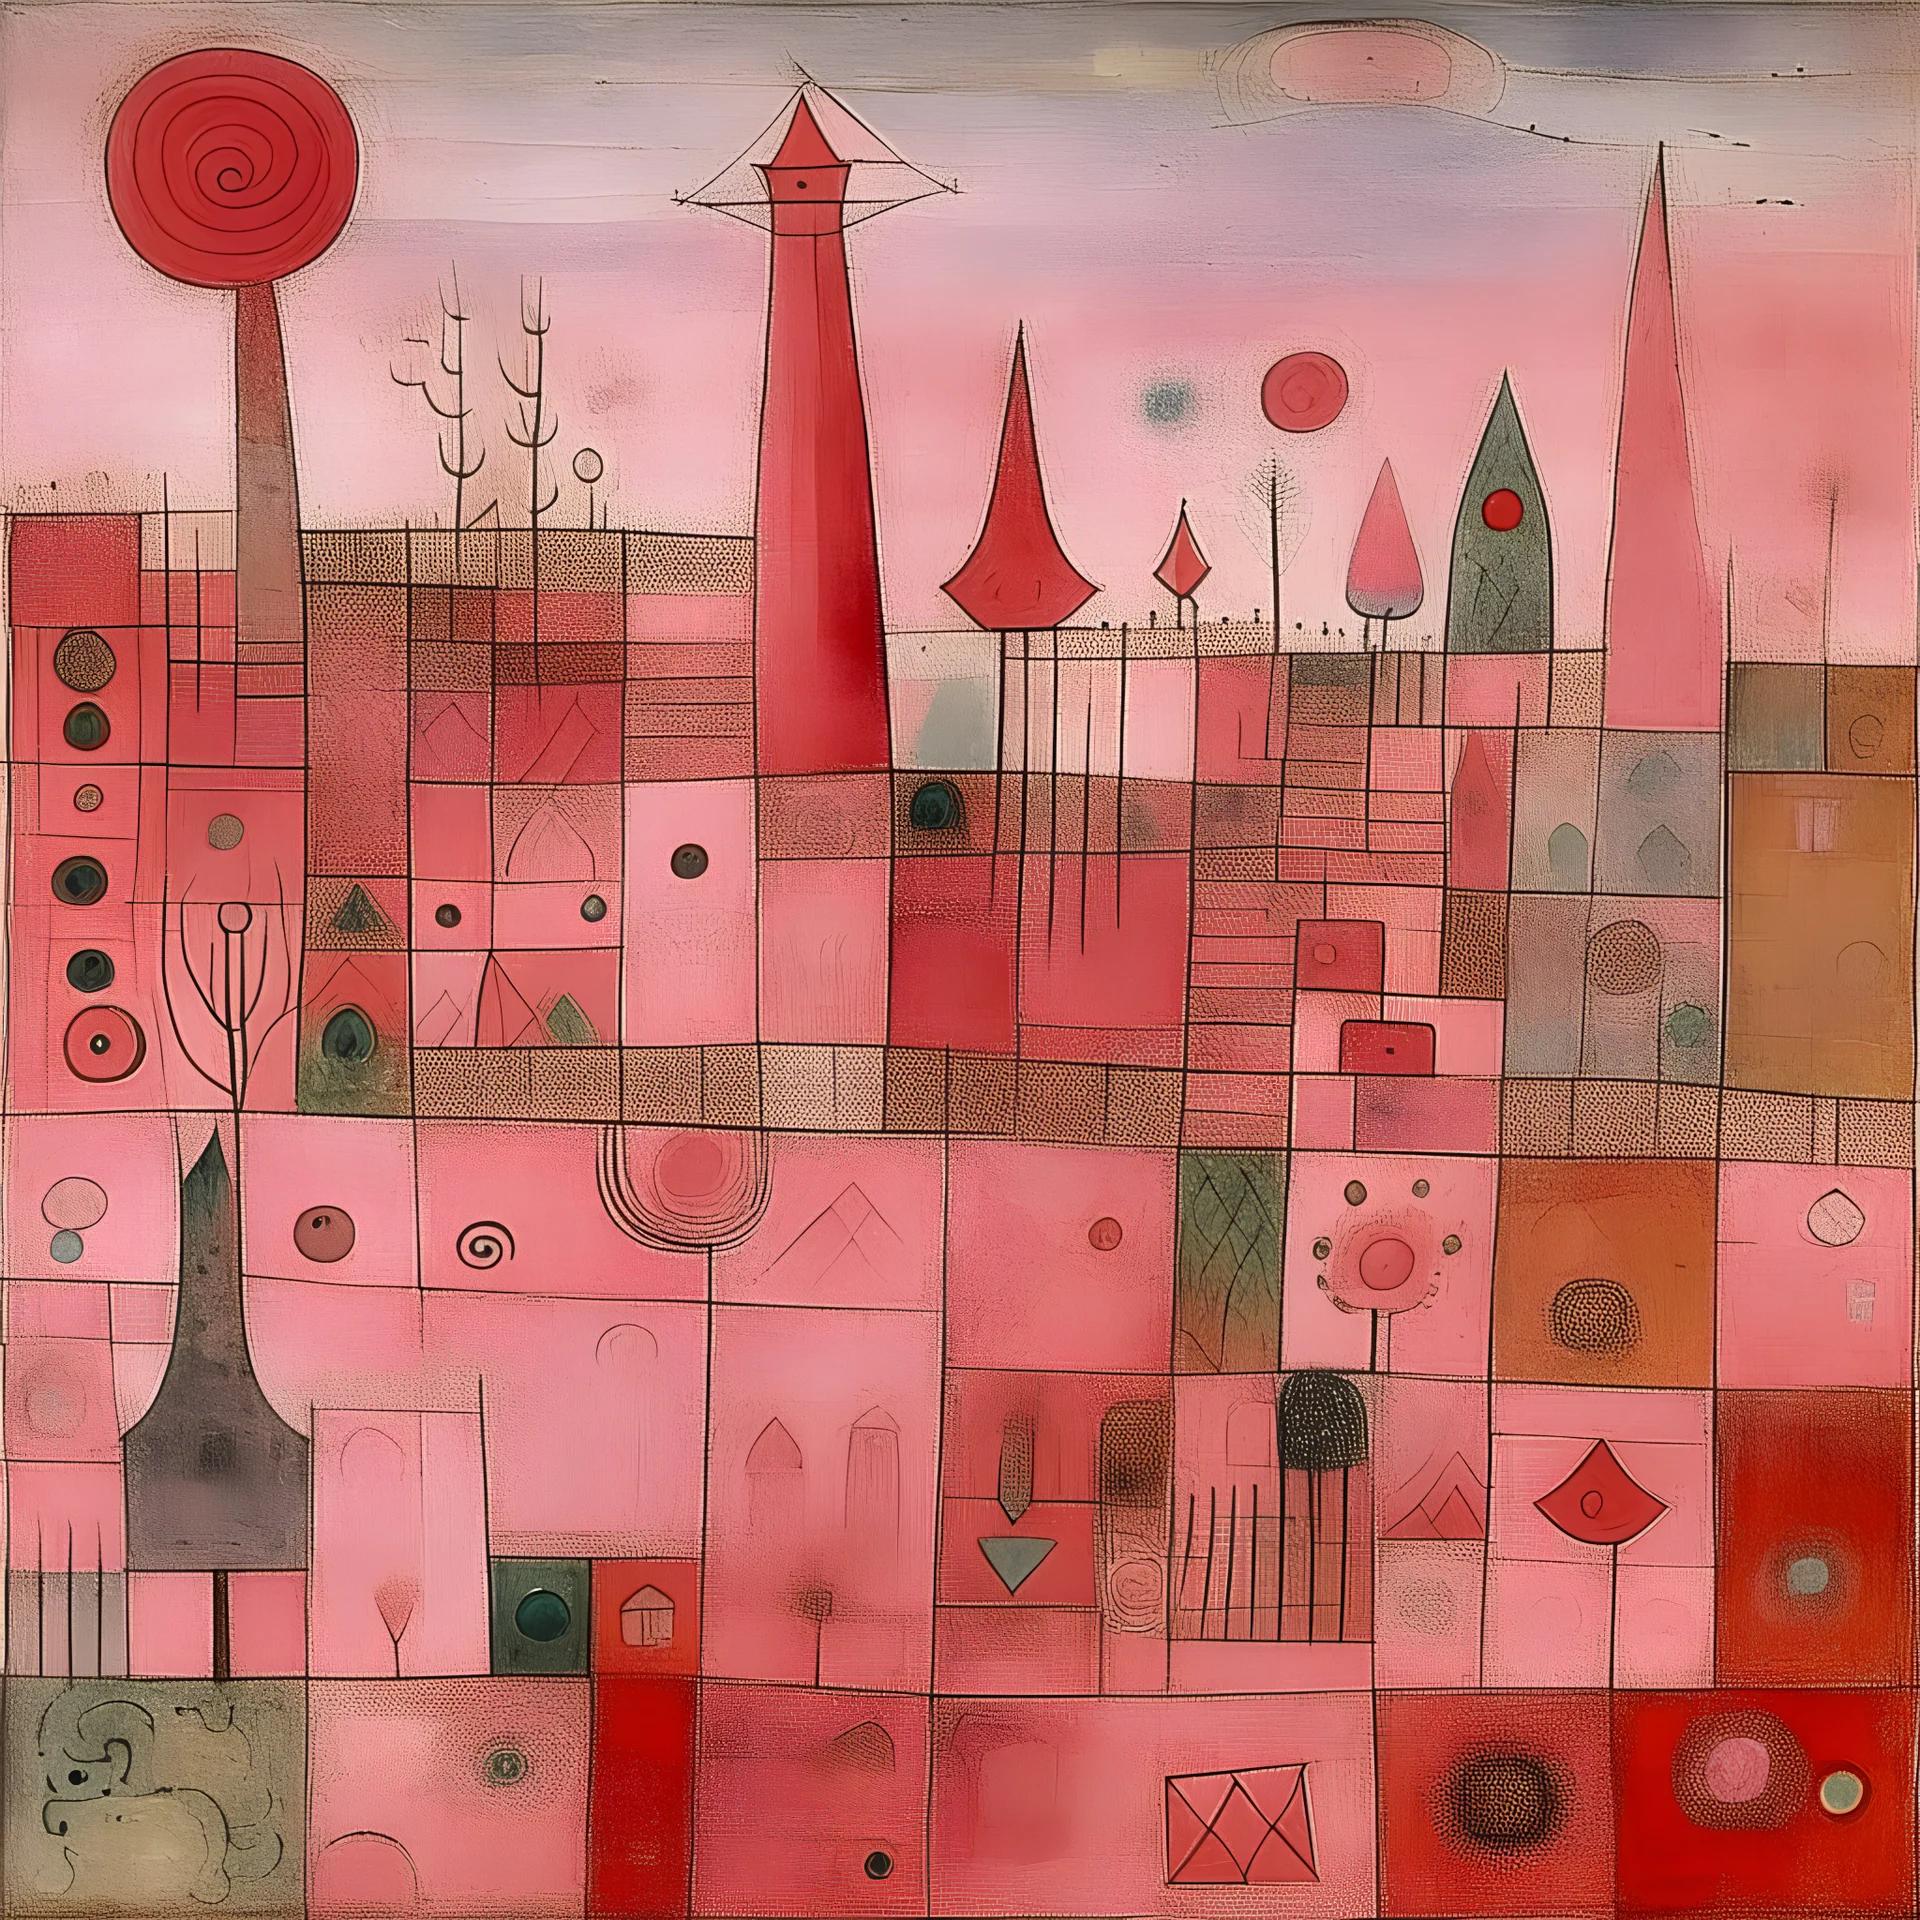 A pink magical realm painted by Paul Klee